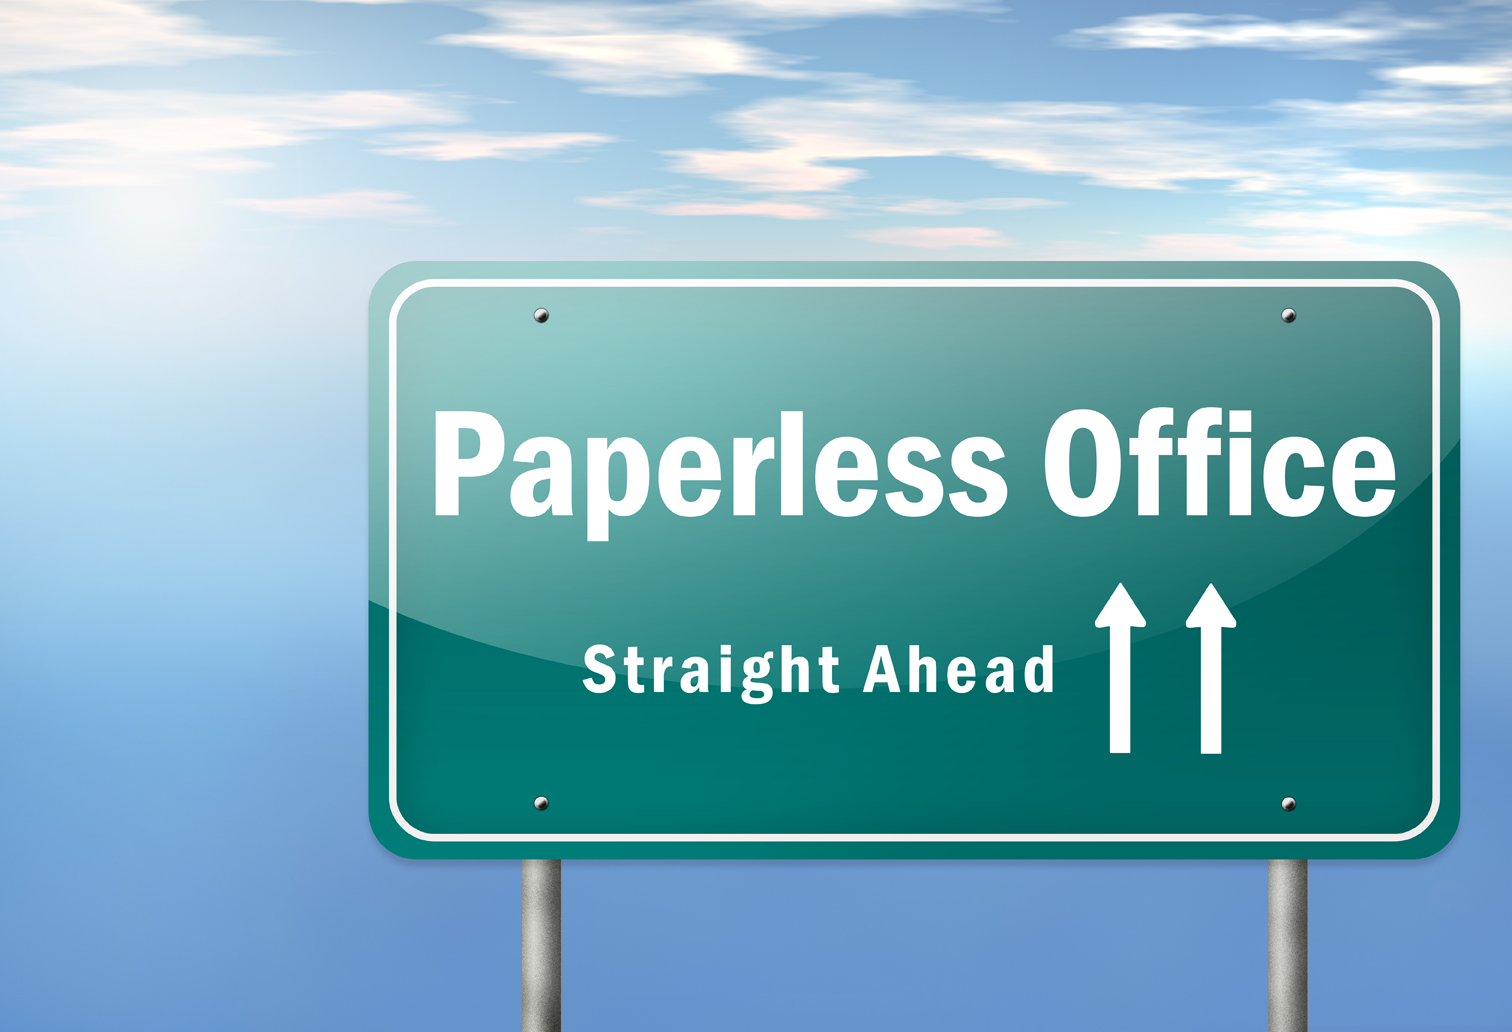 Highway Signpost "Paperless Office"